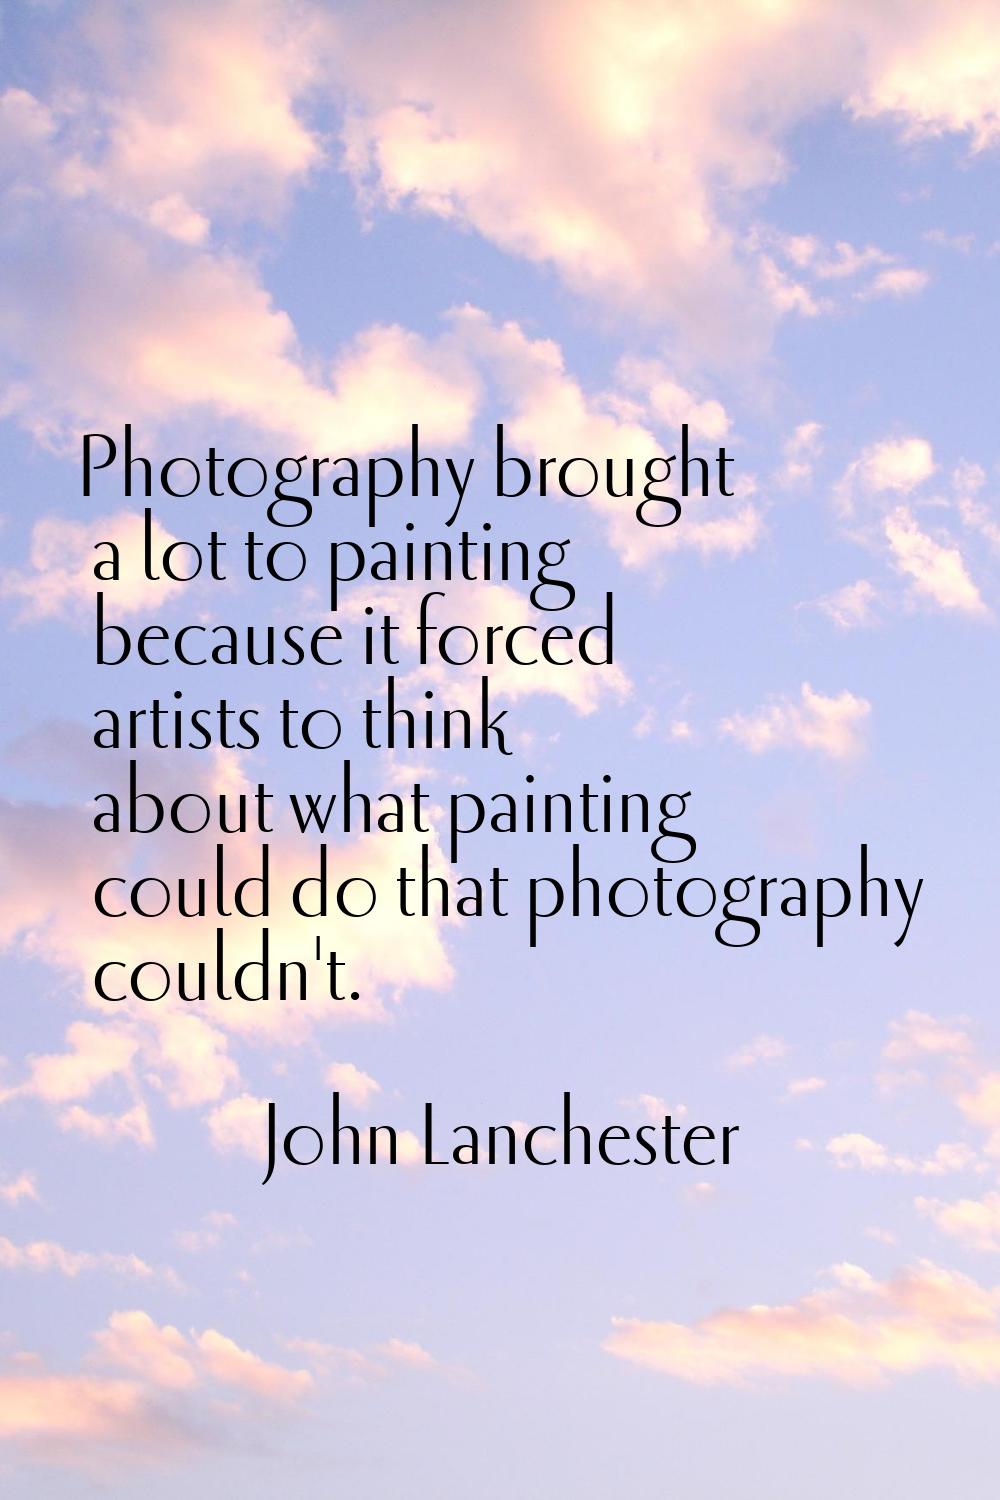 Photography brought a lot to painting because it forced artists to think about what painting could 